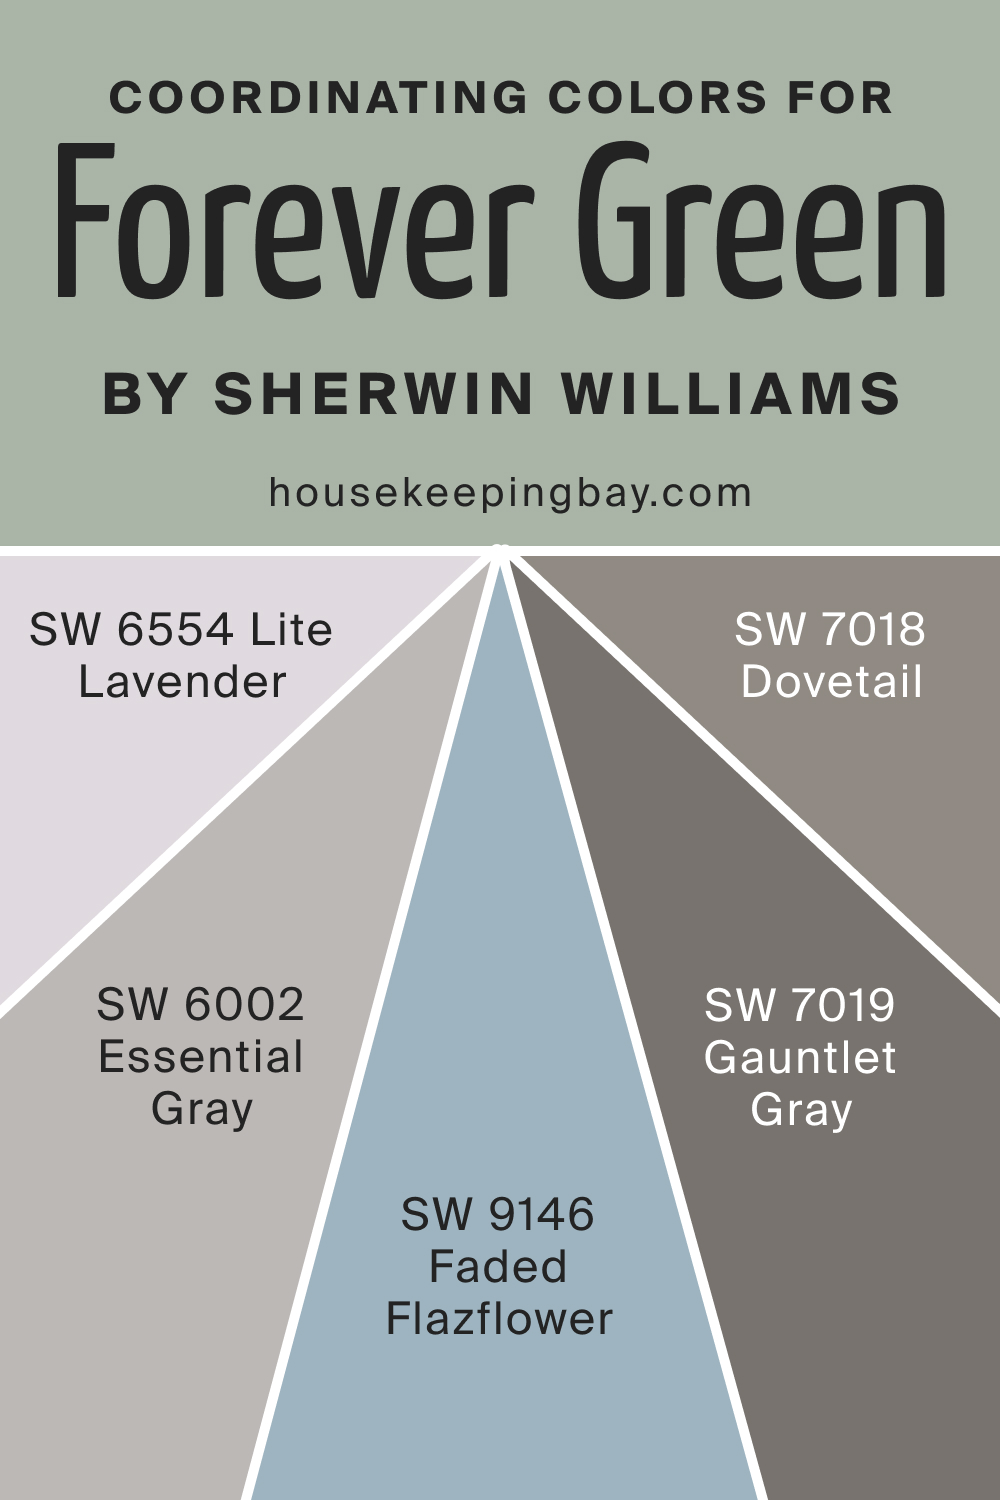 Coordinating Colors for SW 9653 Forever Green by Sherwin Williams